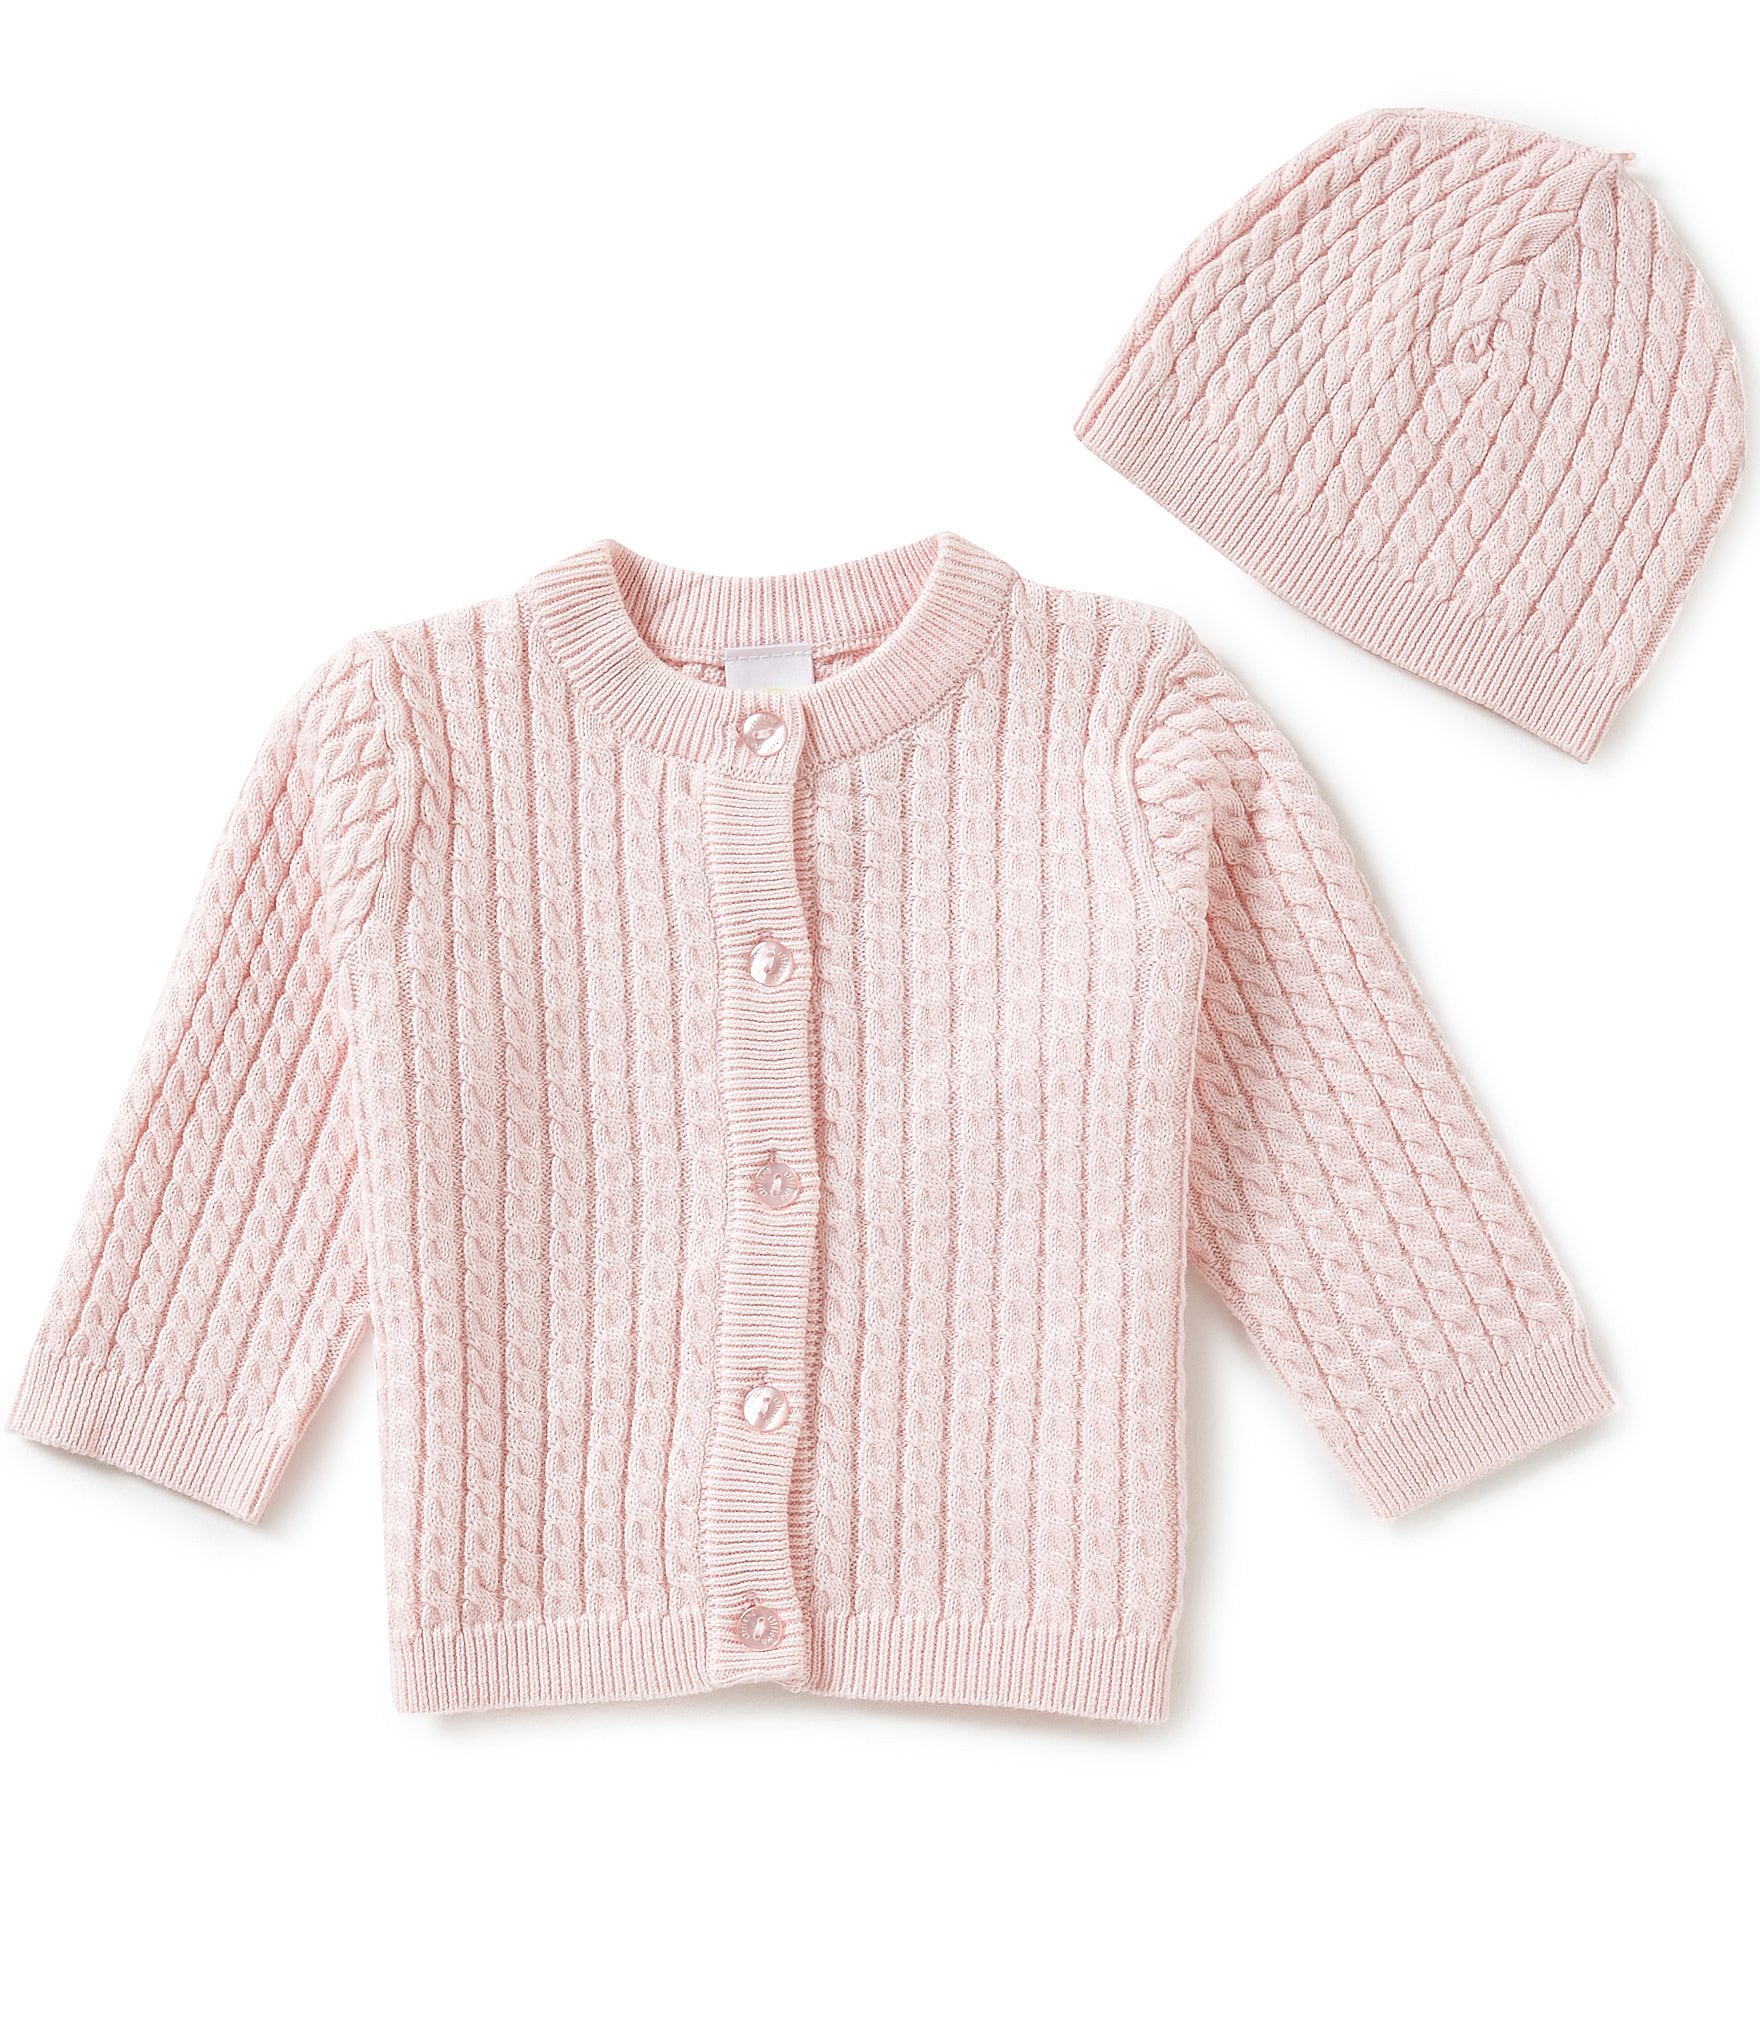 pink outfit for baby boy